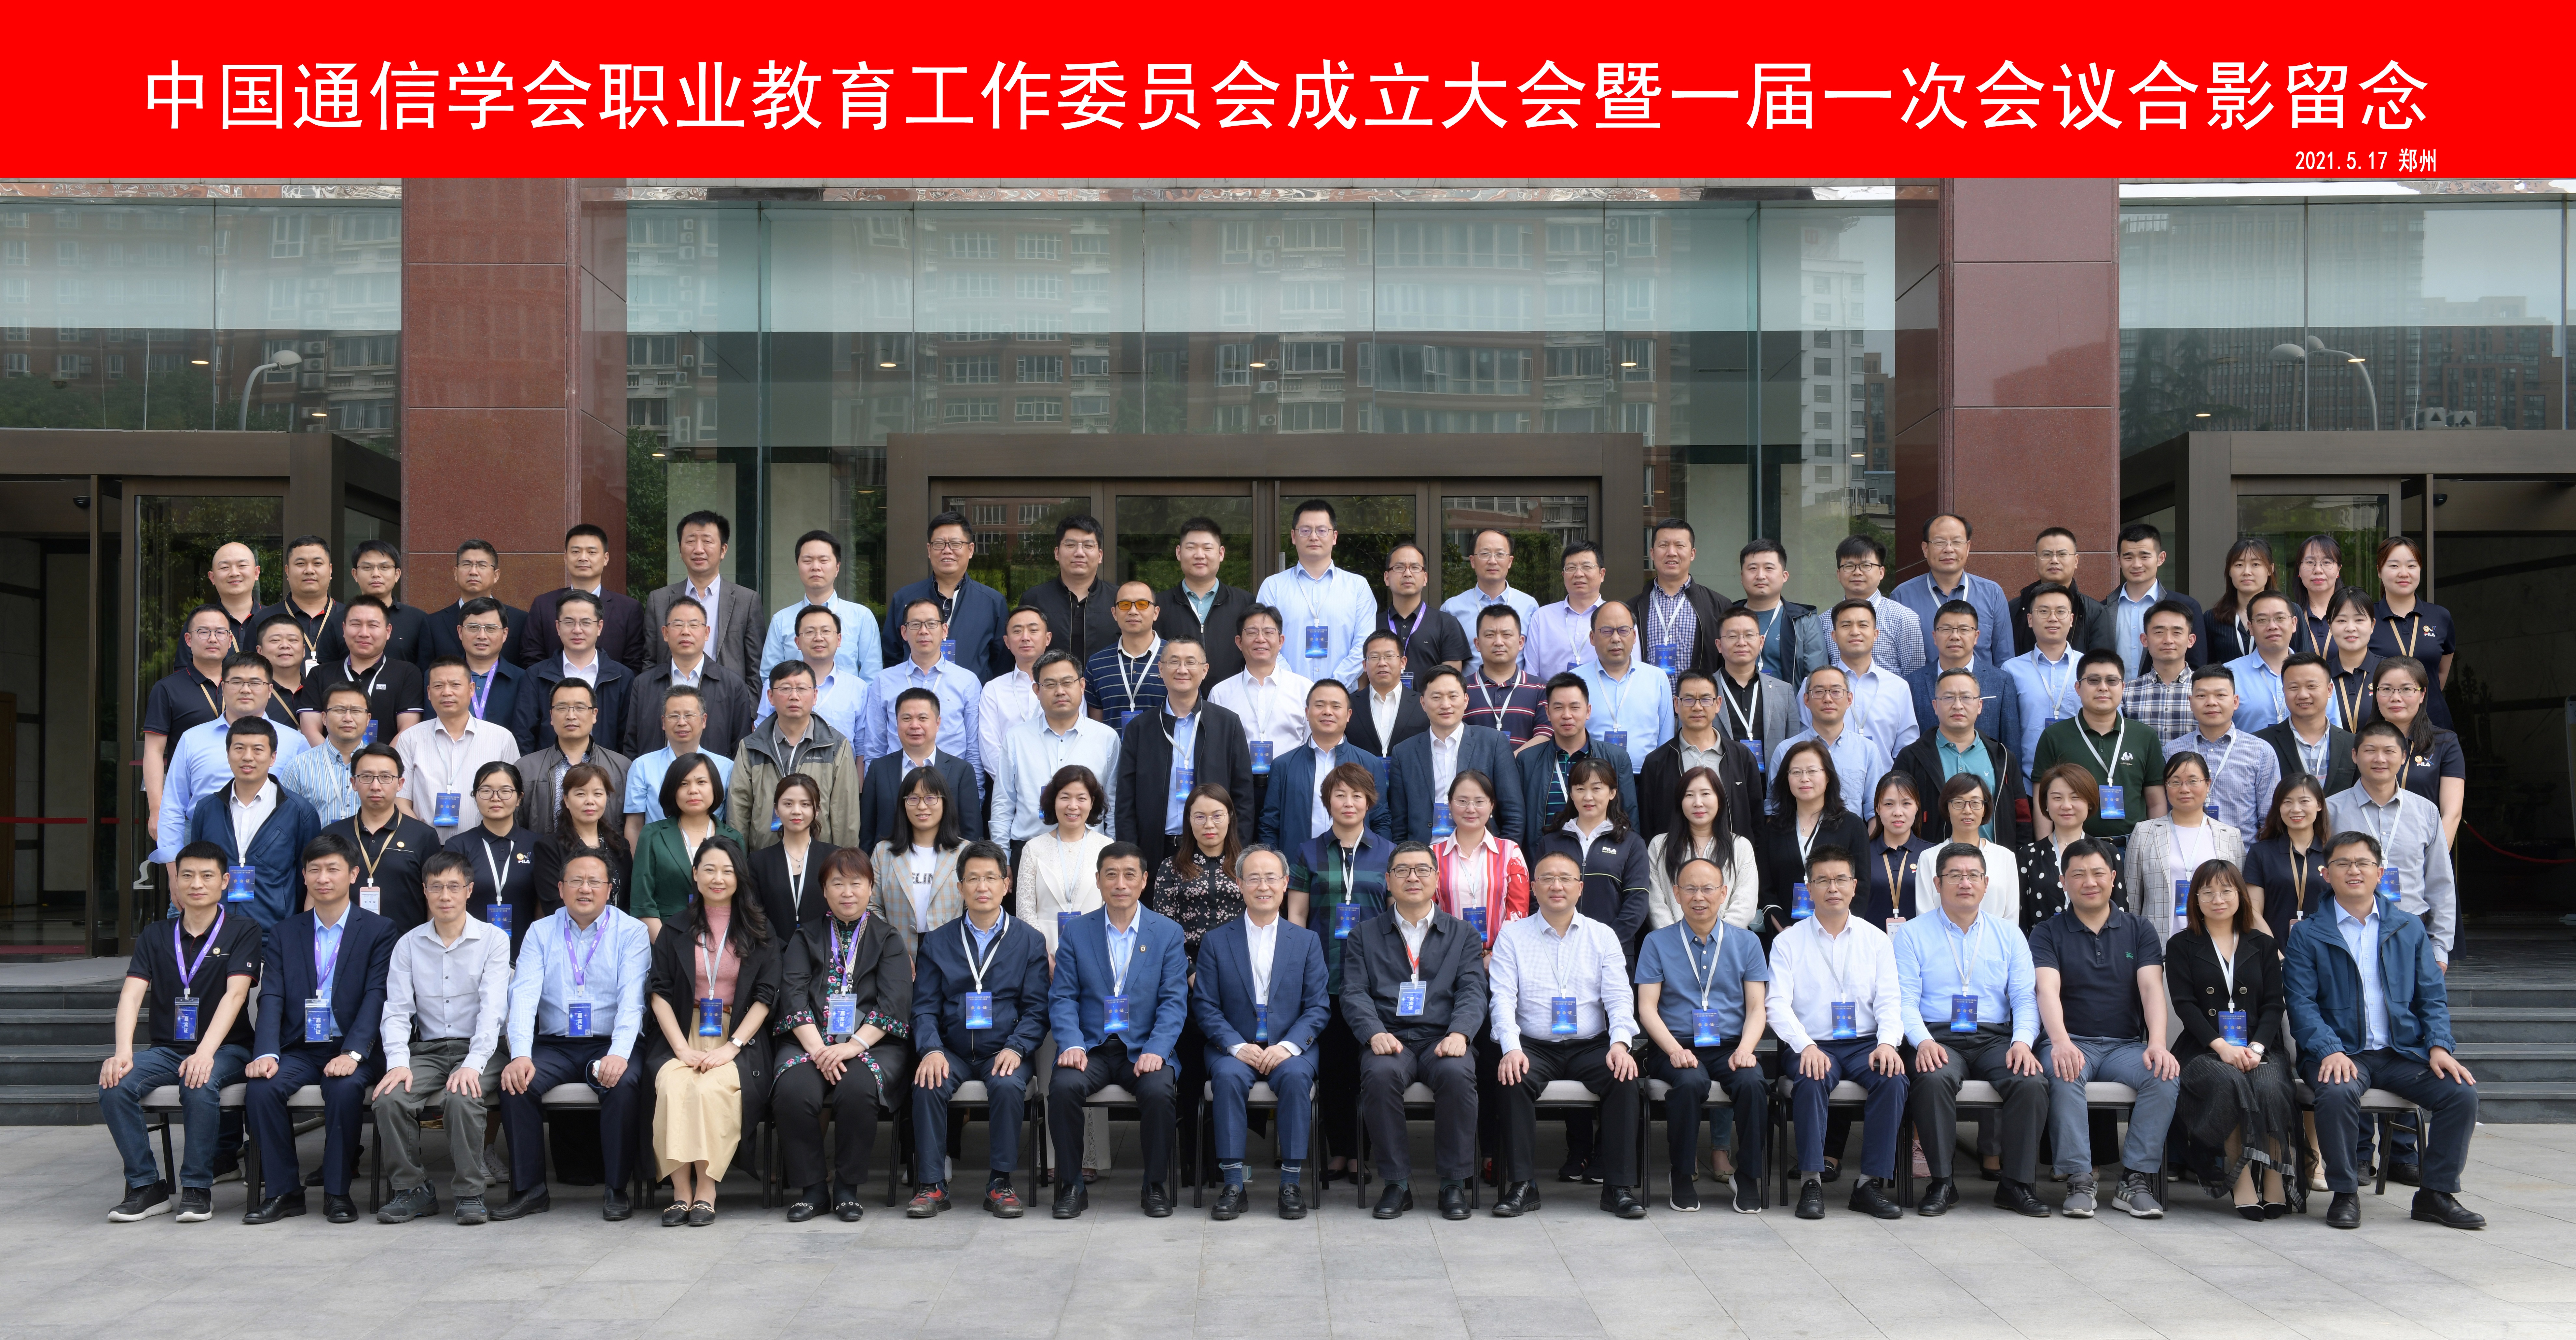 Secretary of the Party Committee and President Wen Tao Elected as the Chairman of the First Vocational Education Work Committee of the China Institute of Communications